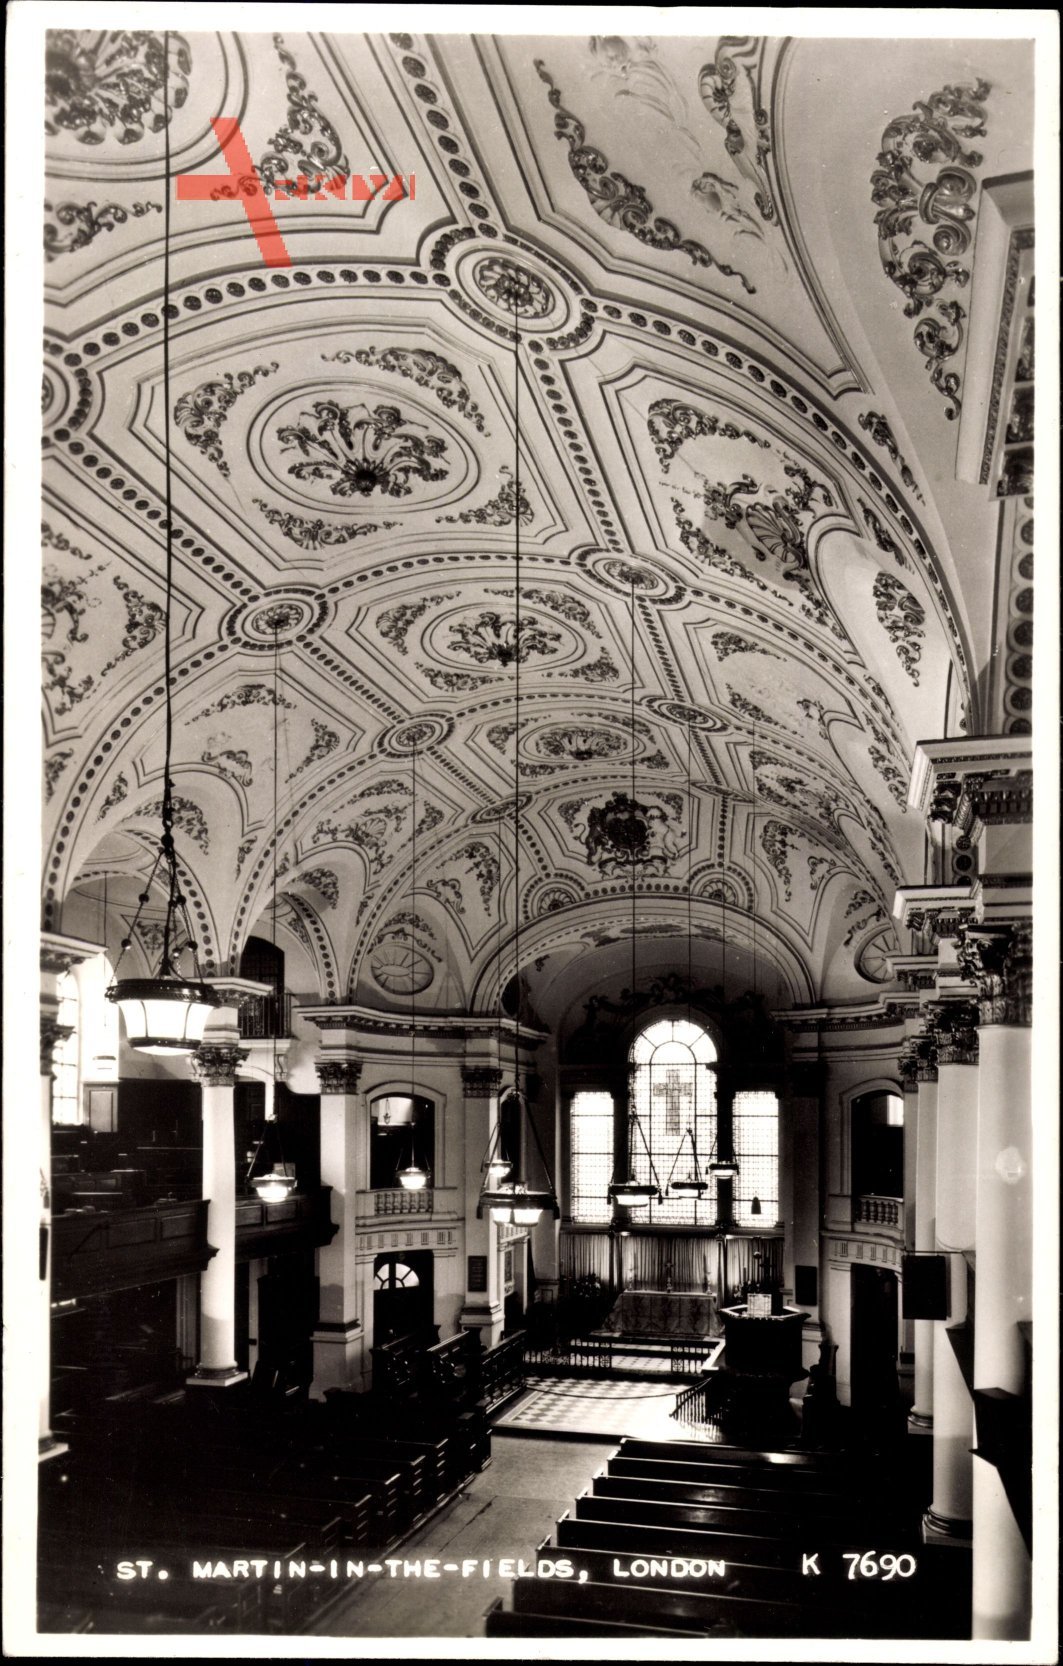 London City, St. Martin in the Fields, Interior view, Ceiling